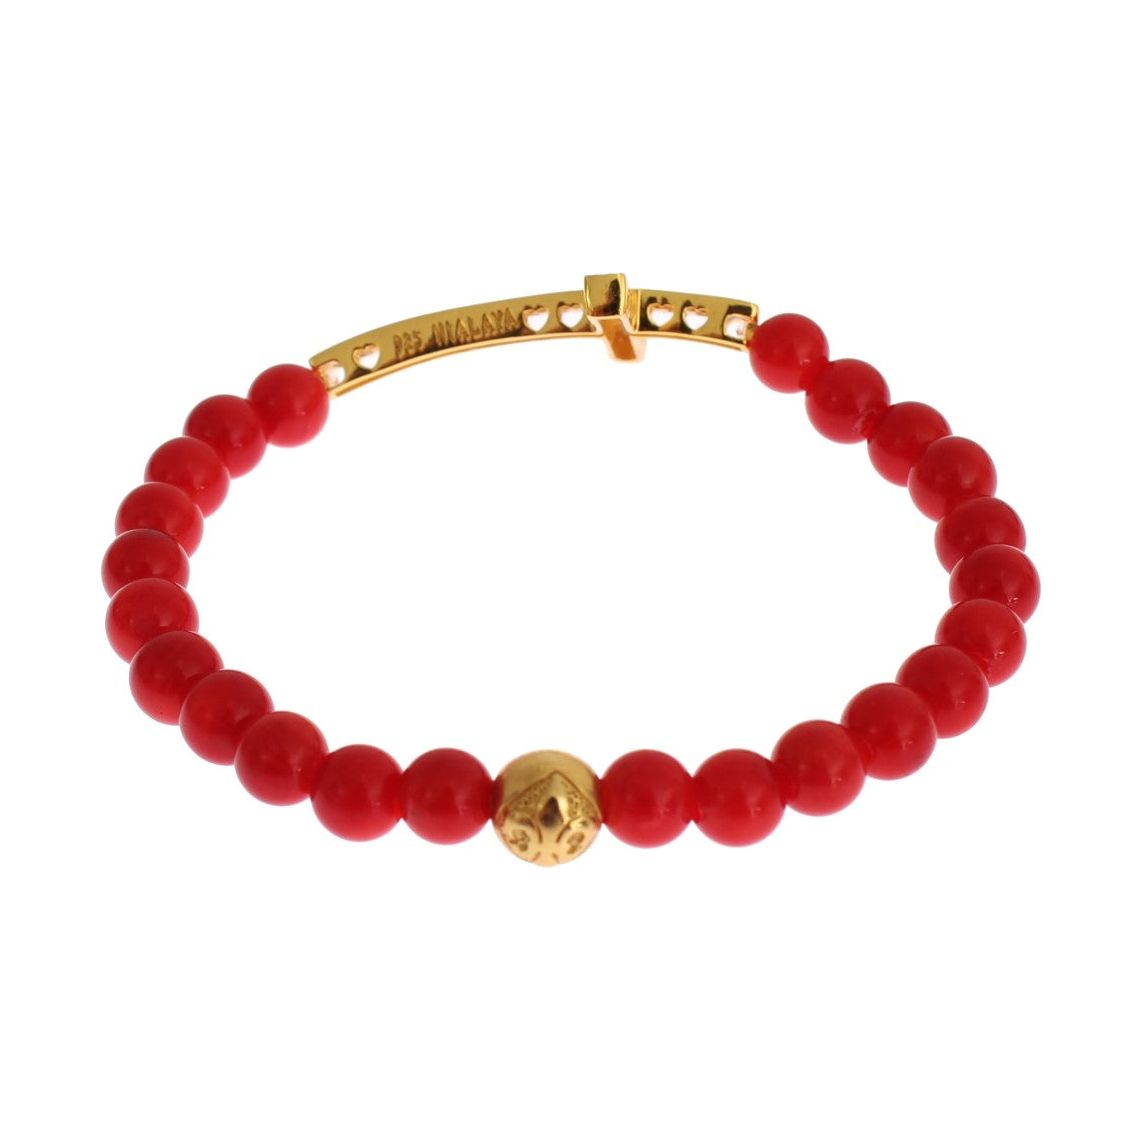 Nialaya Elegant Gold and Red Coral Beaded Bracelet Bracelet red-coral-gold-cz-cross-925-silver-bracelet